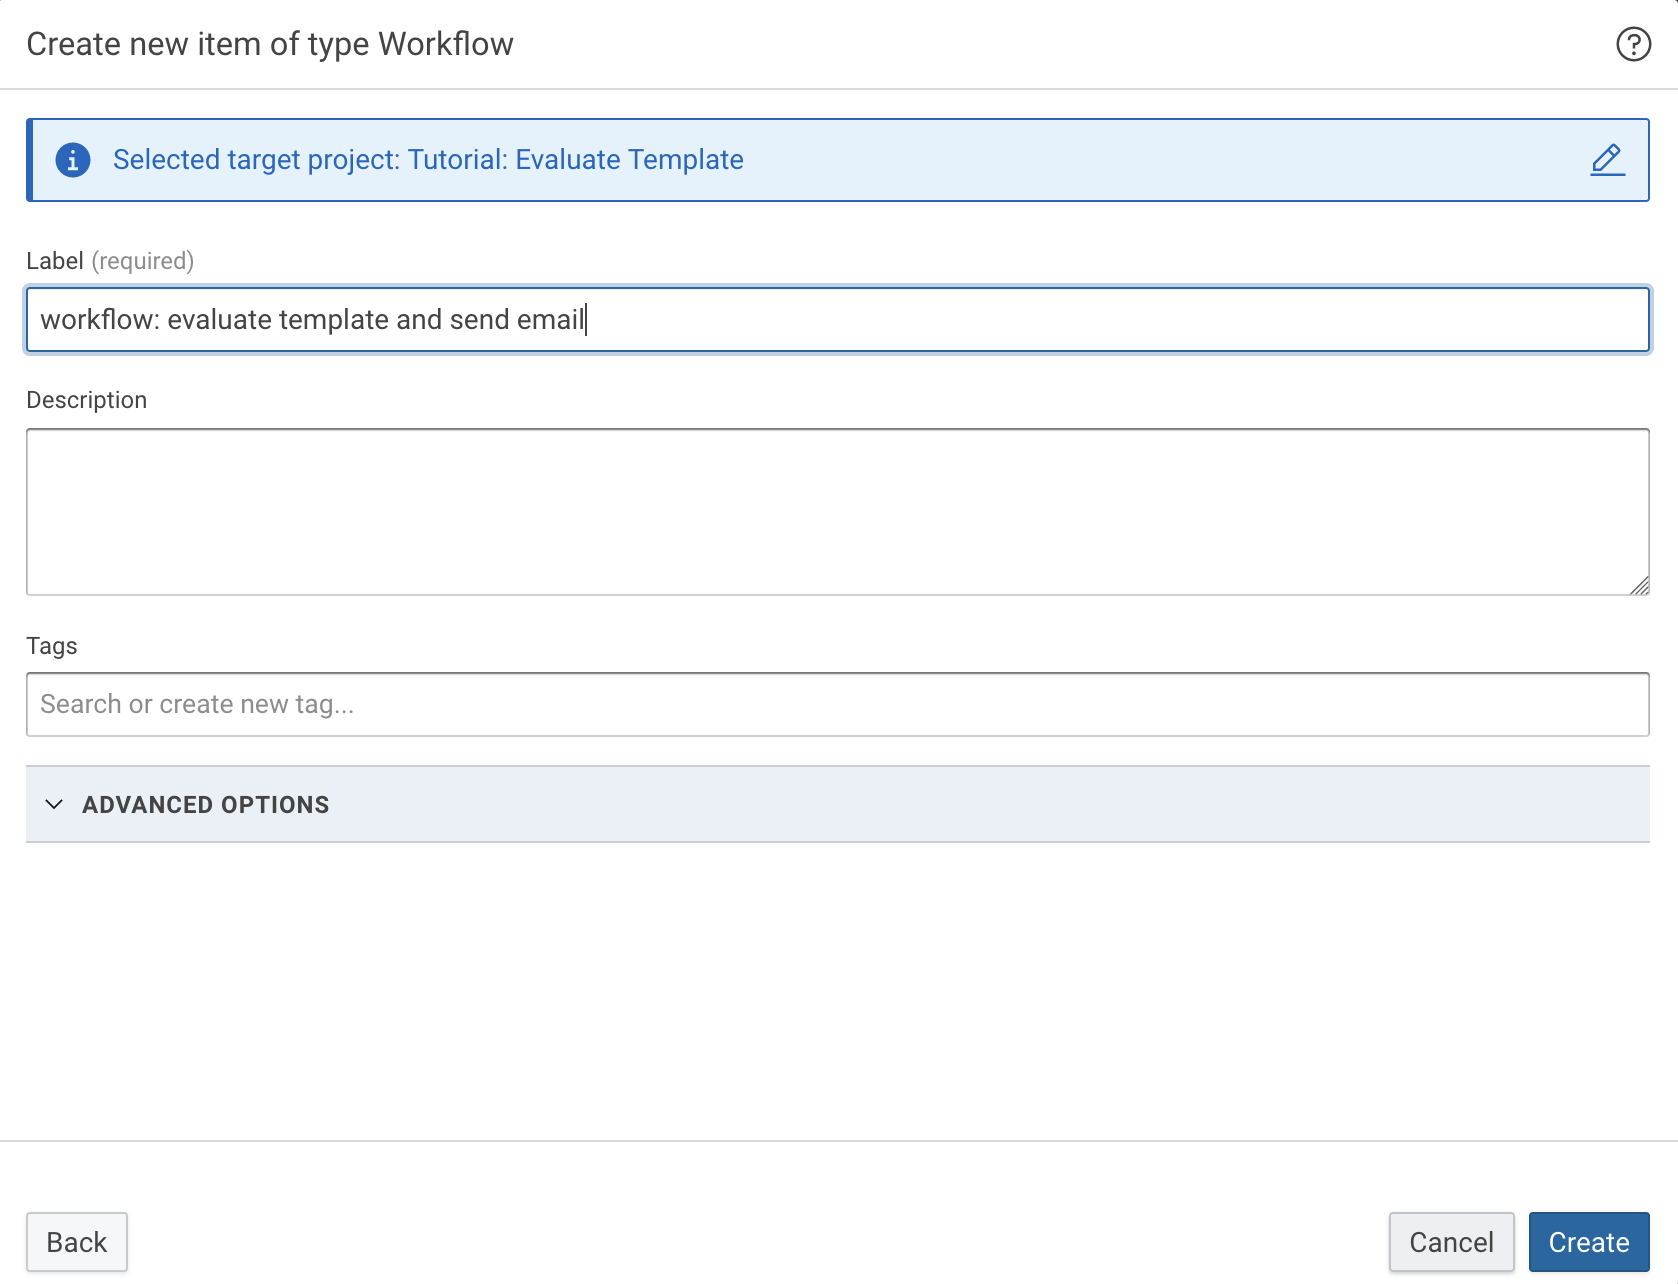 Dialog to create new Knowledge Graph dataset